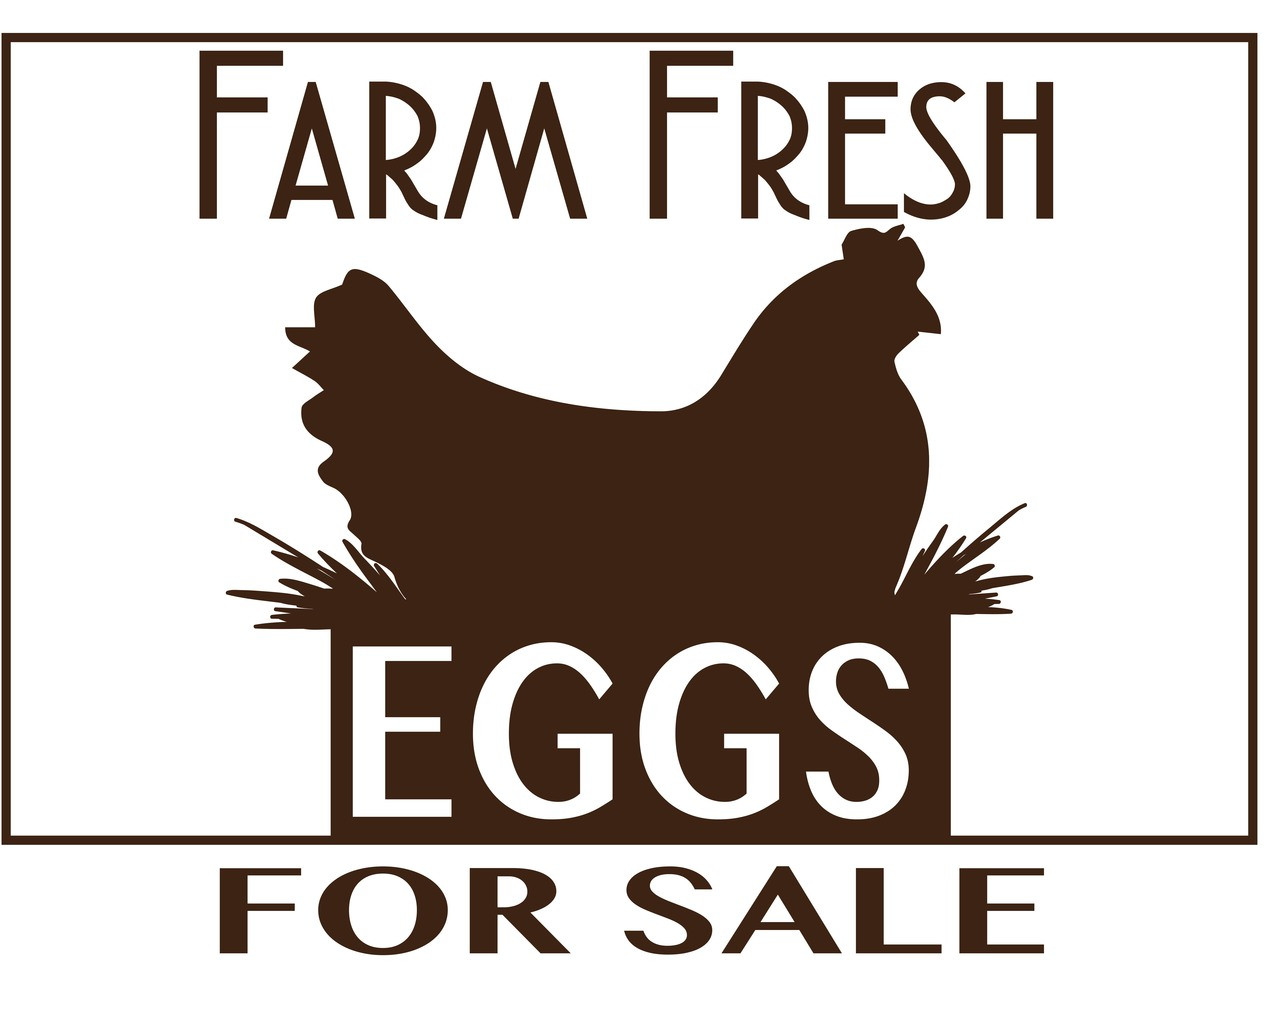 Fresh Eggs For Sale Sign PL 1 Blue Sky Bee Supply